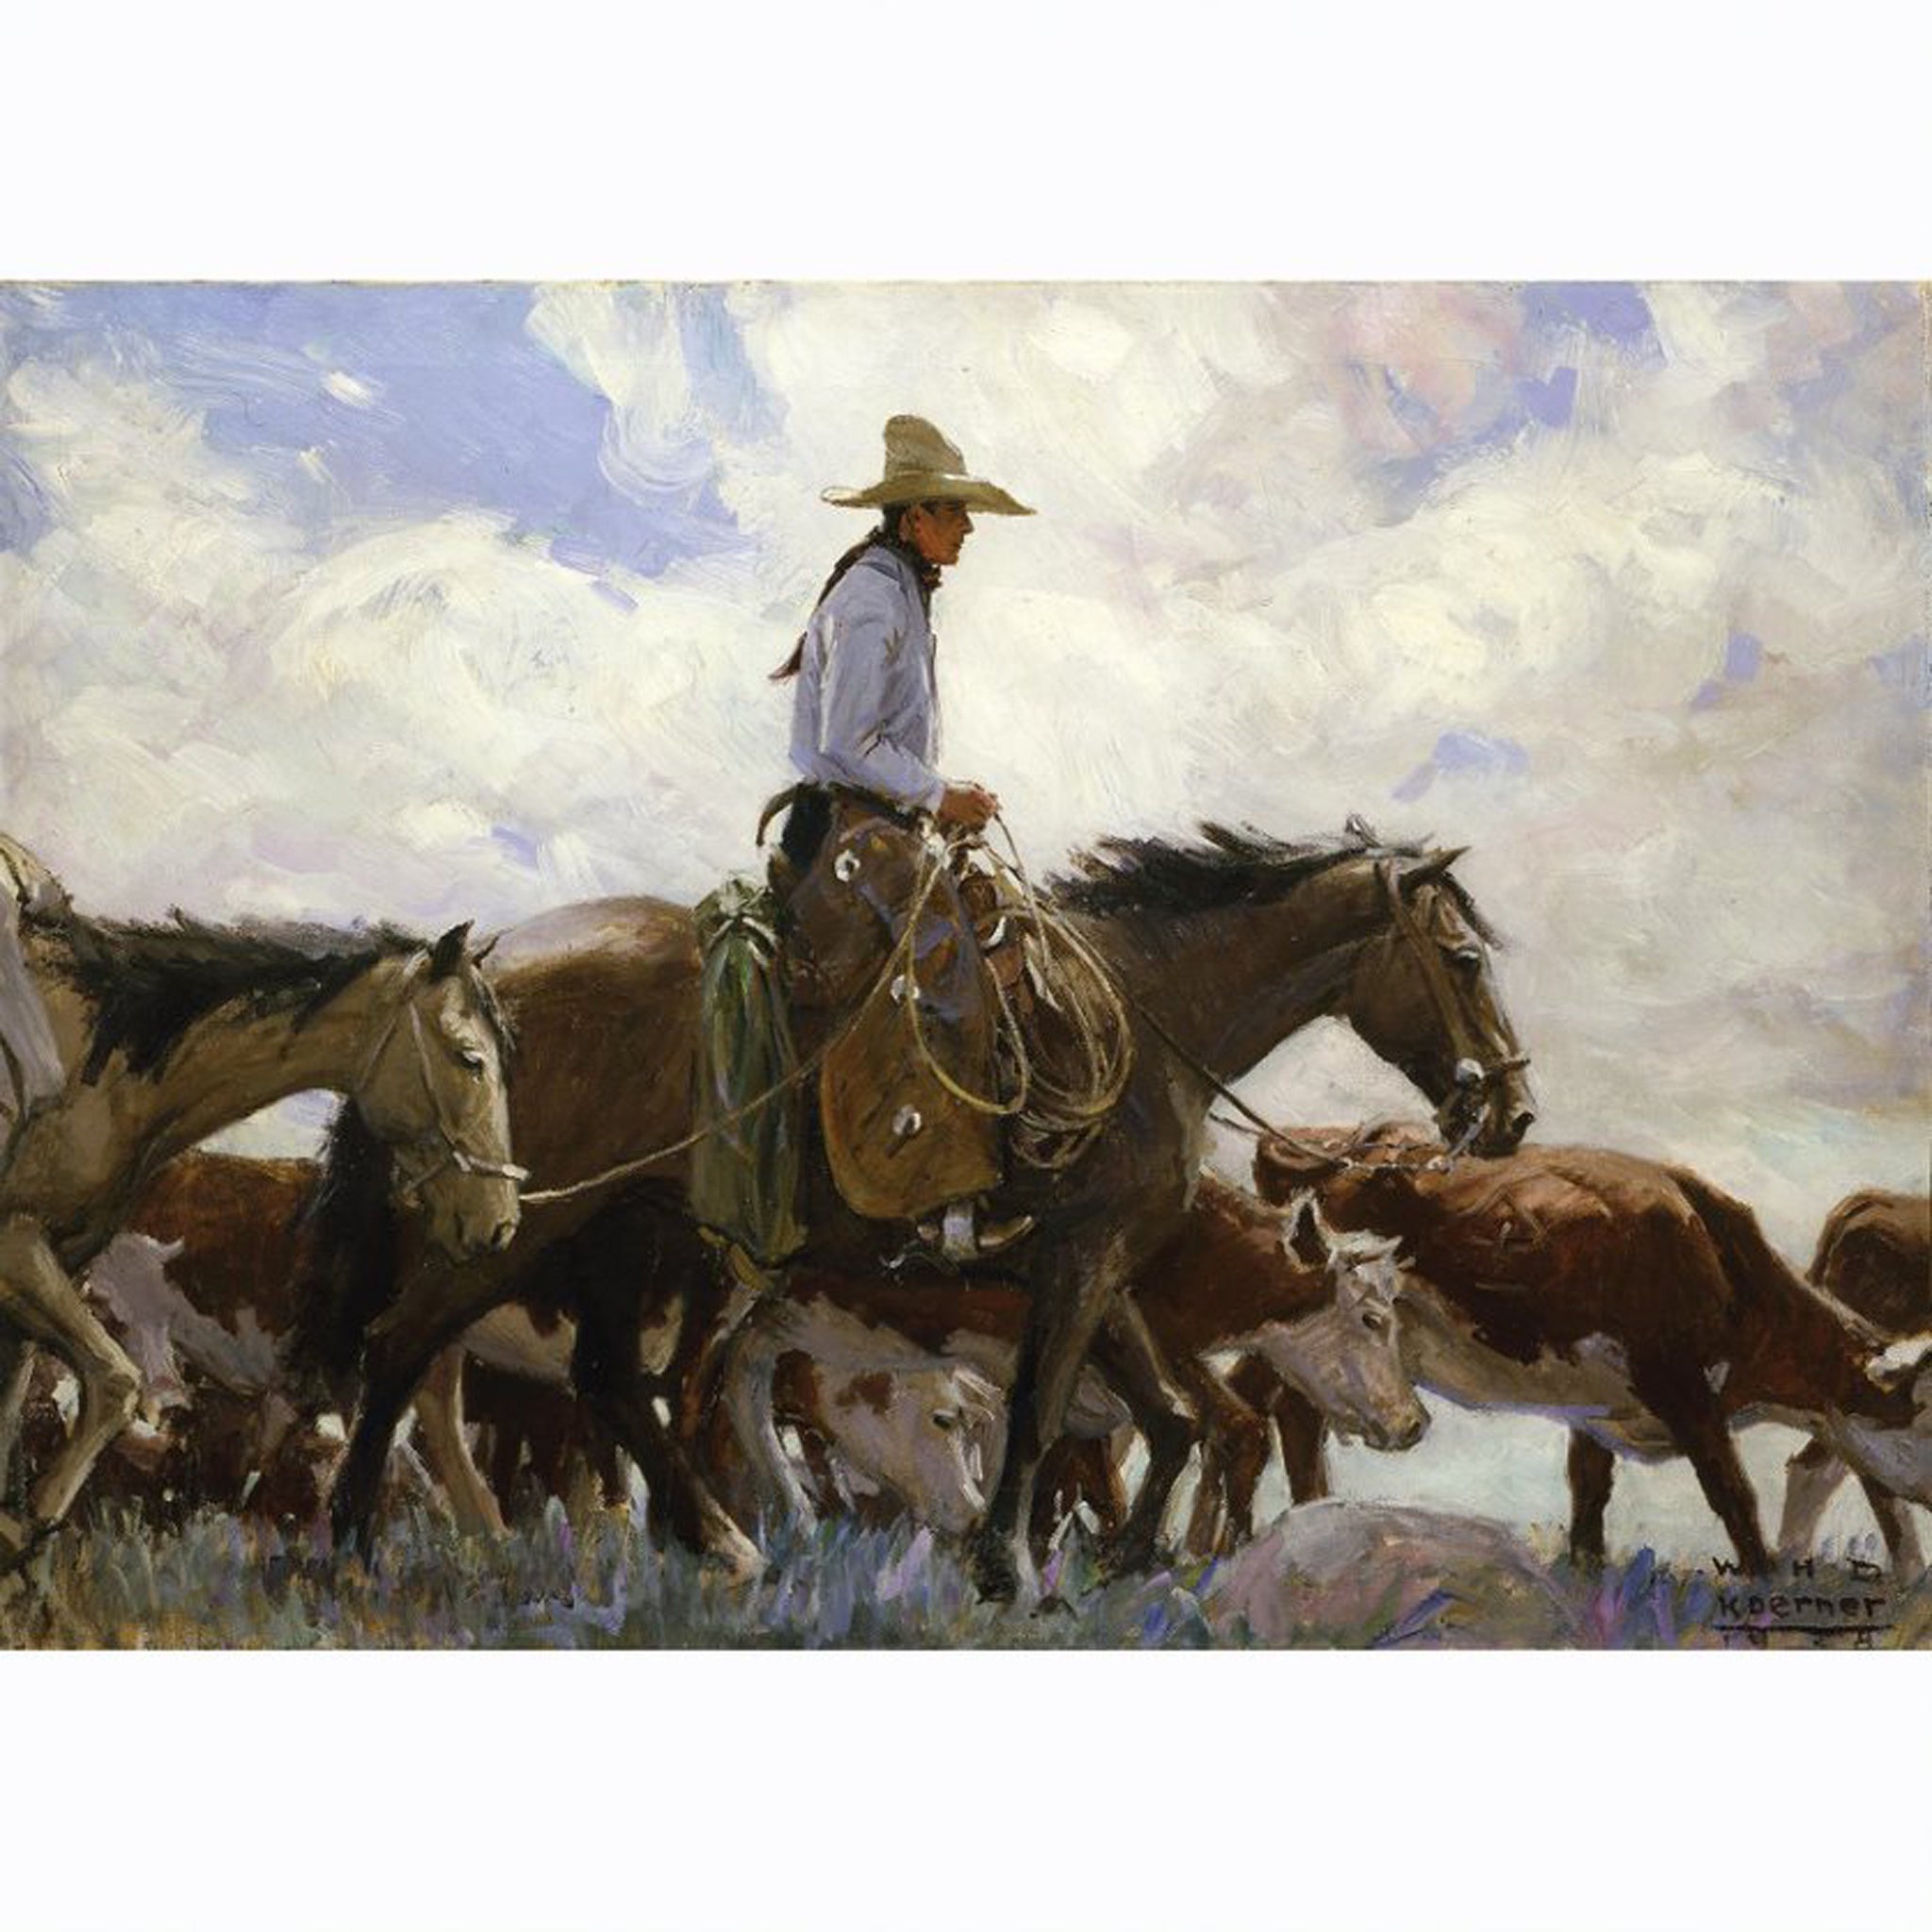 PR 54* THEY STOOD THERE WATCHING HIM MOVE OFF ACROSS THE RANGE, LEADING HIS PACK HORSE BY W.H.D. KOERNER #31016152